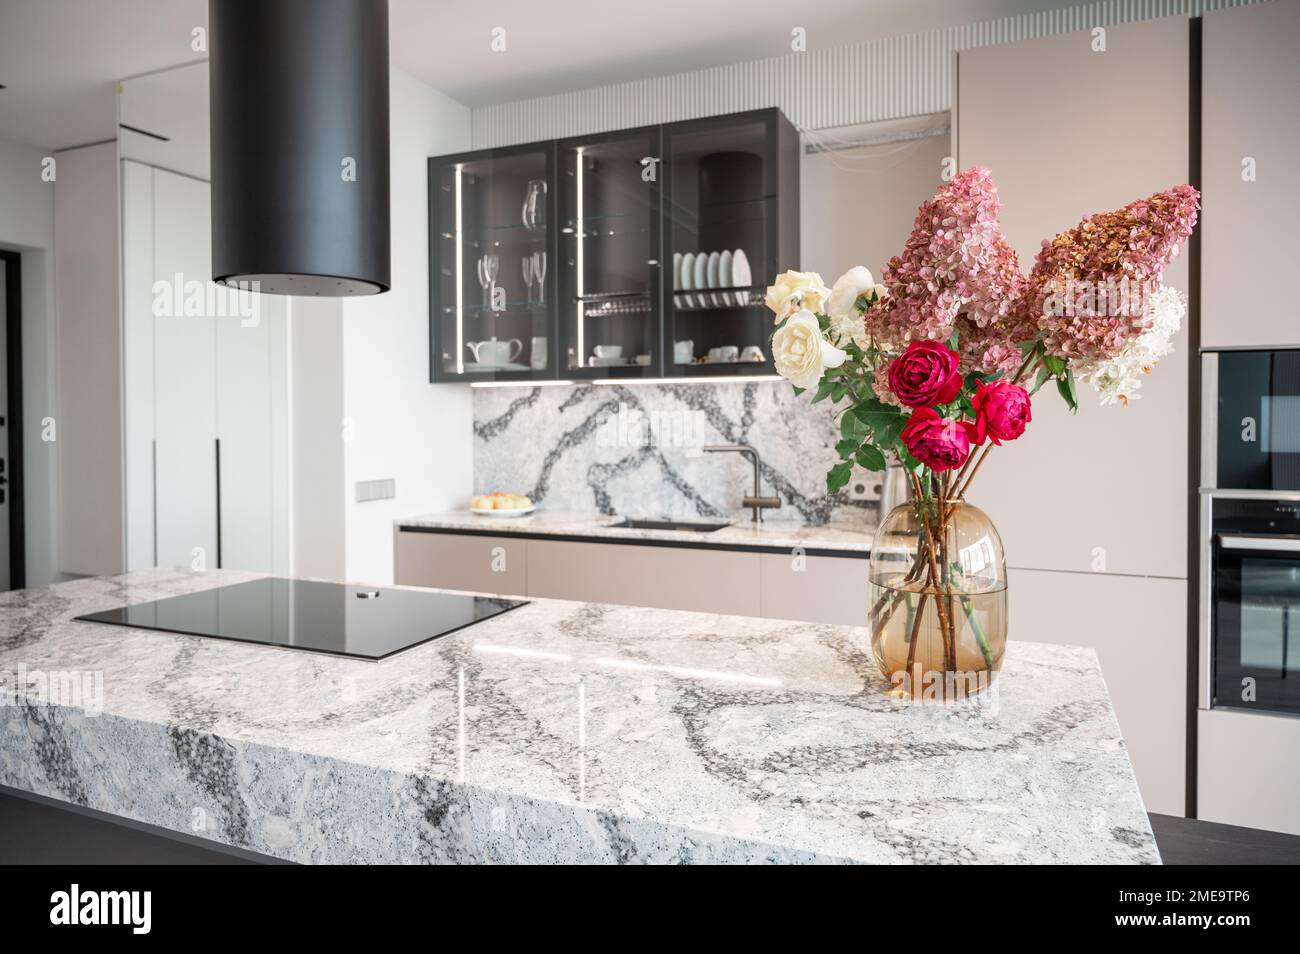 Kitchen in new luxury home with granite quartz table with bouquet of flowers Stock Photo